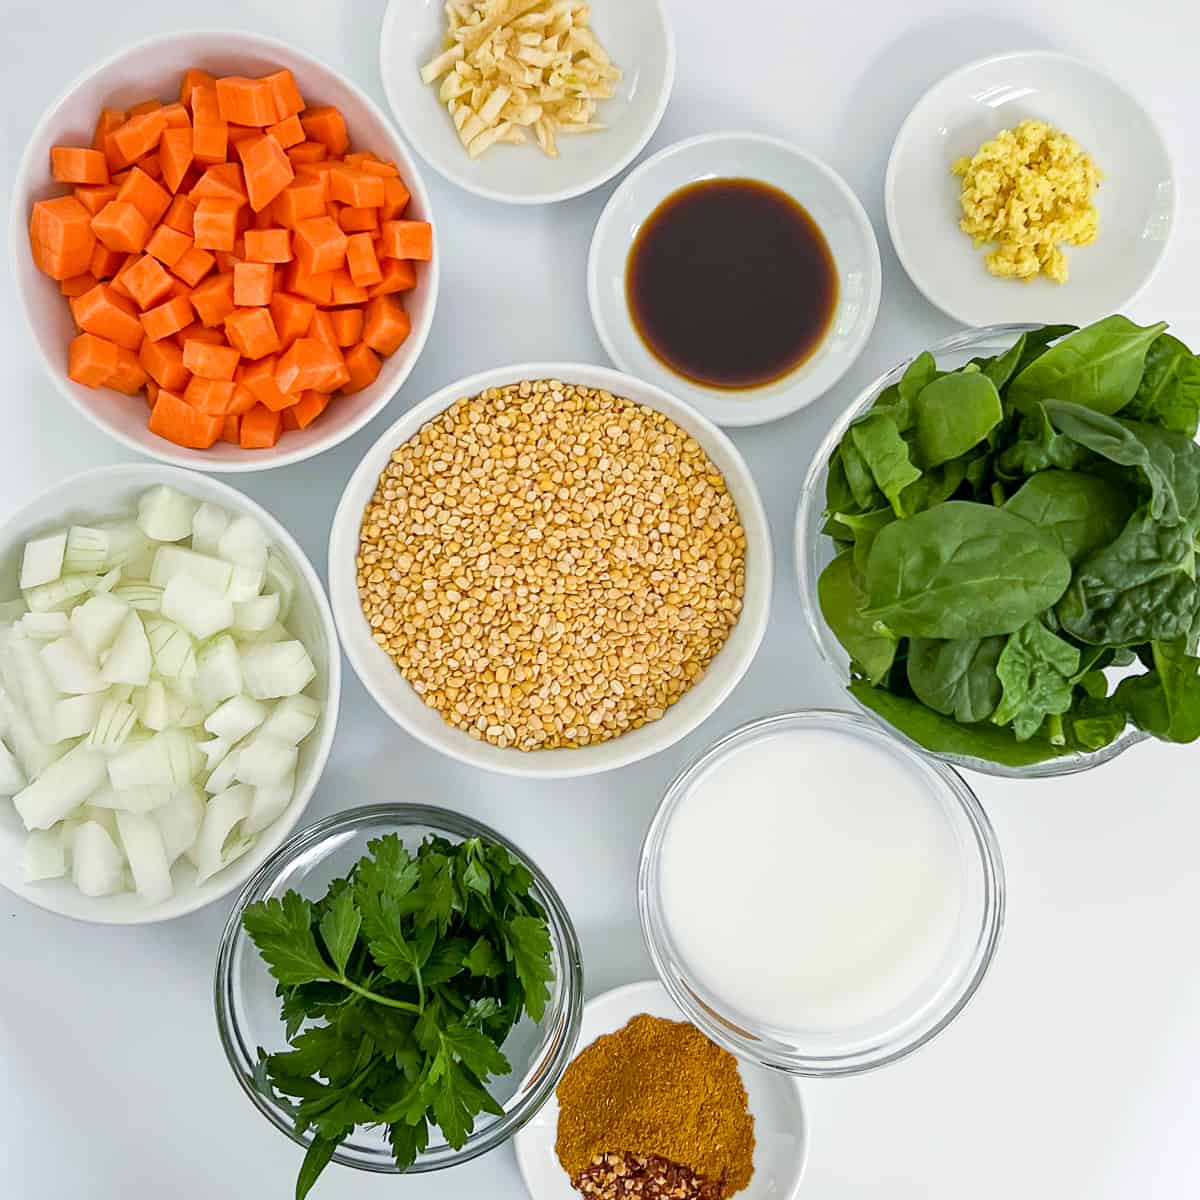 top view key ingredients for split mung beans: yellow split mung beans, diced sweet potato, minced garlic, grated ginger, coconut aminos, fresh spinach, chopped onion, fresh parsley, spices, and coconut milk